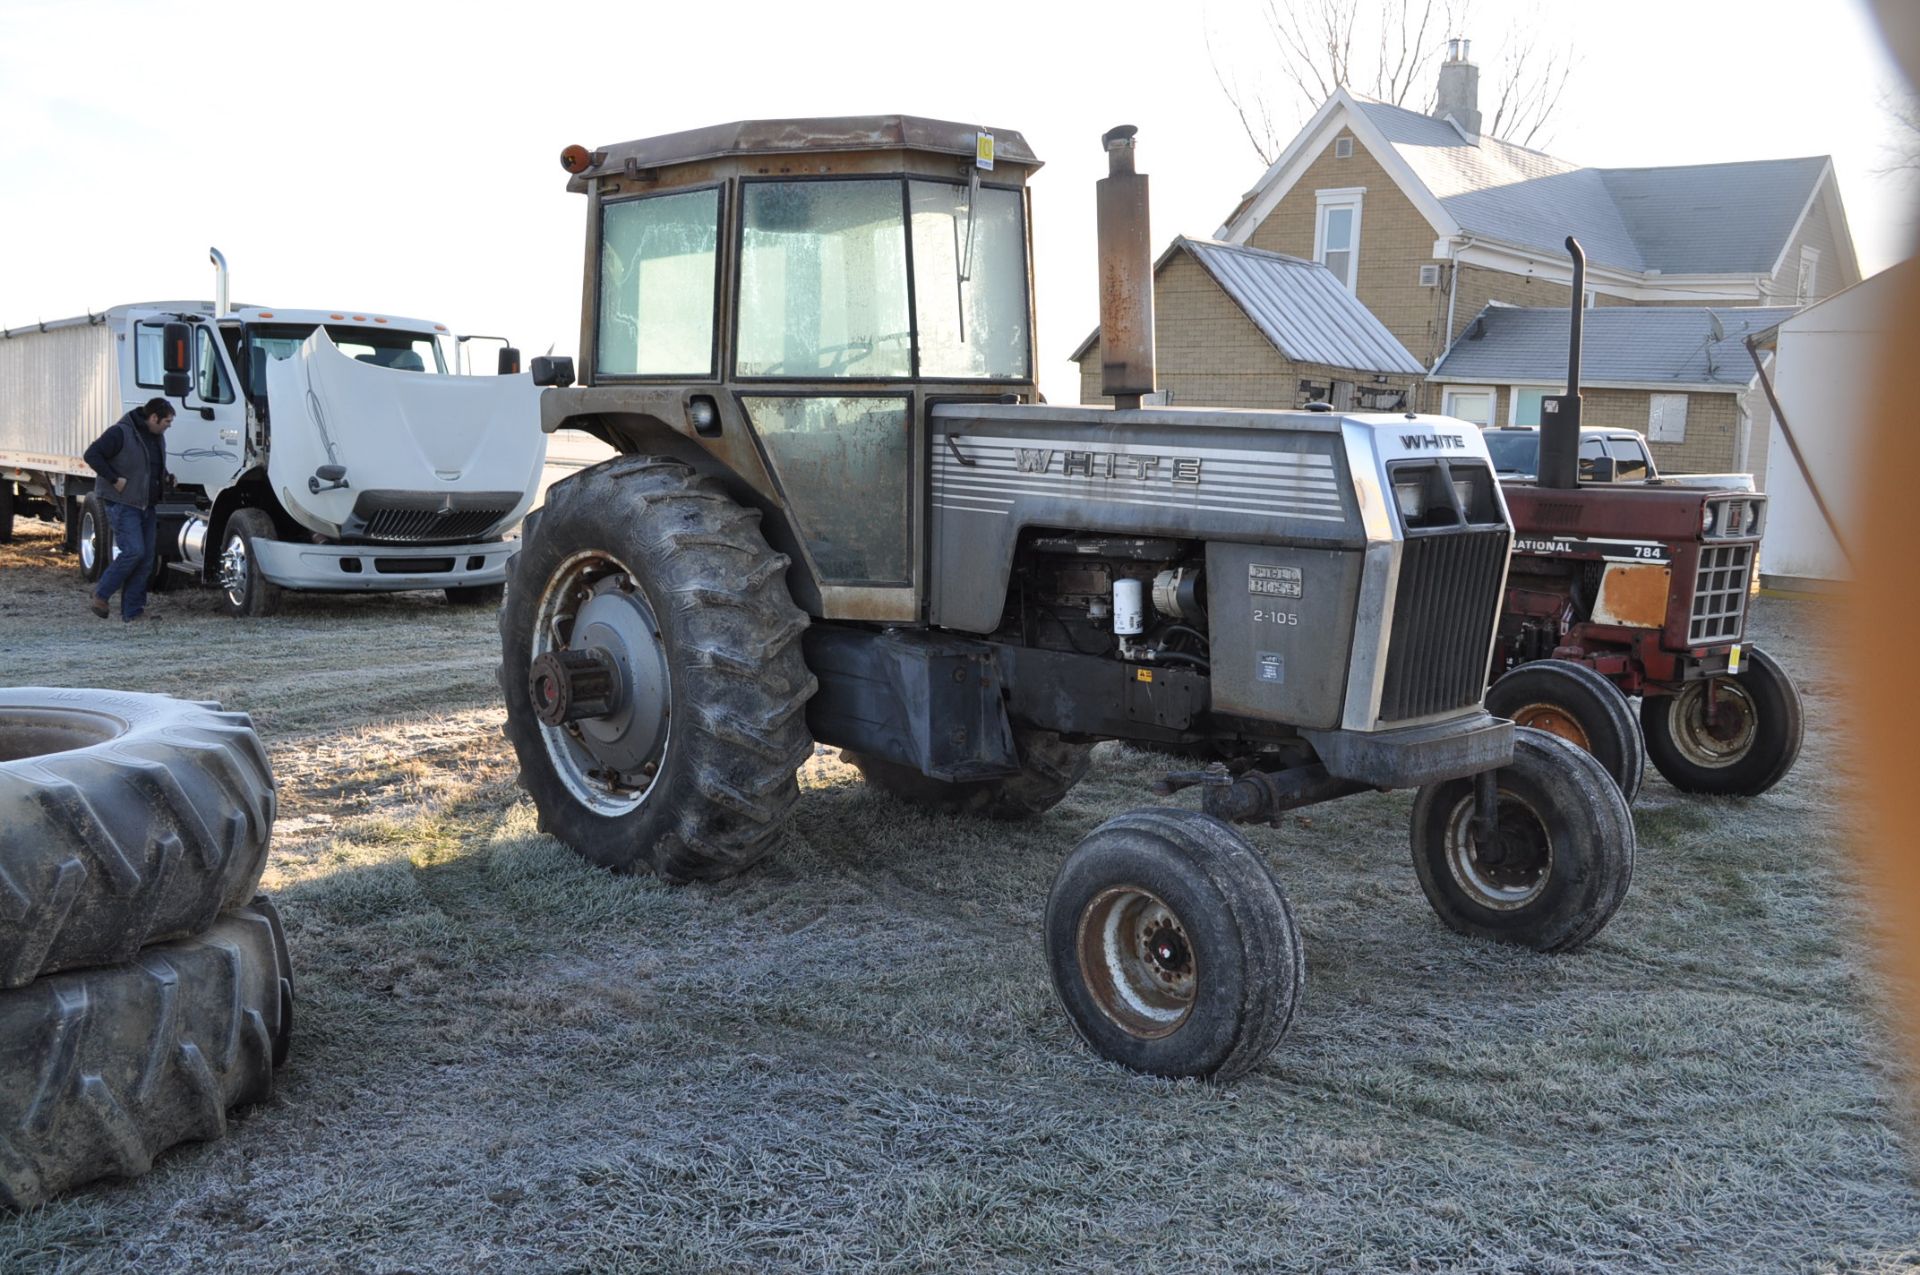 White 2-105 Field Boss tractor, 18.4-38 duals, 11L-15 front, diesel, over/under, 2 hyd remotes - Image 5 of 19